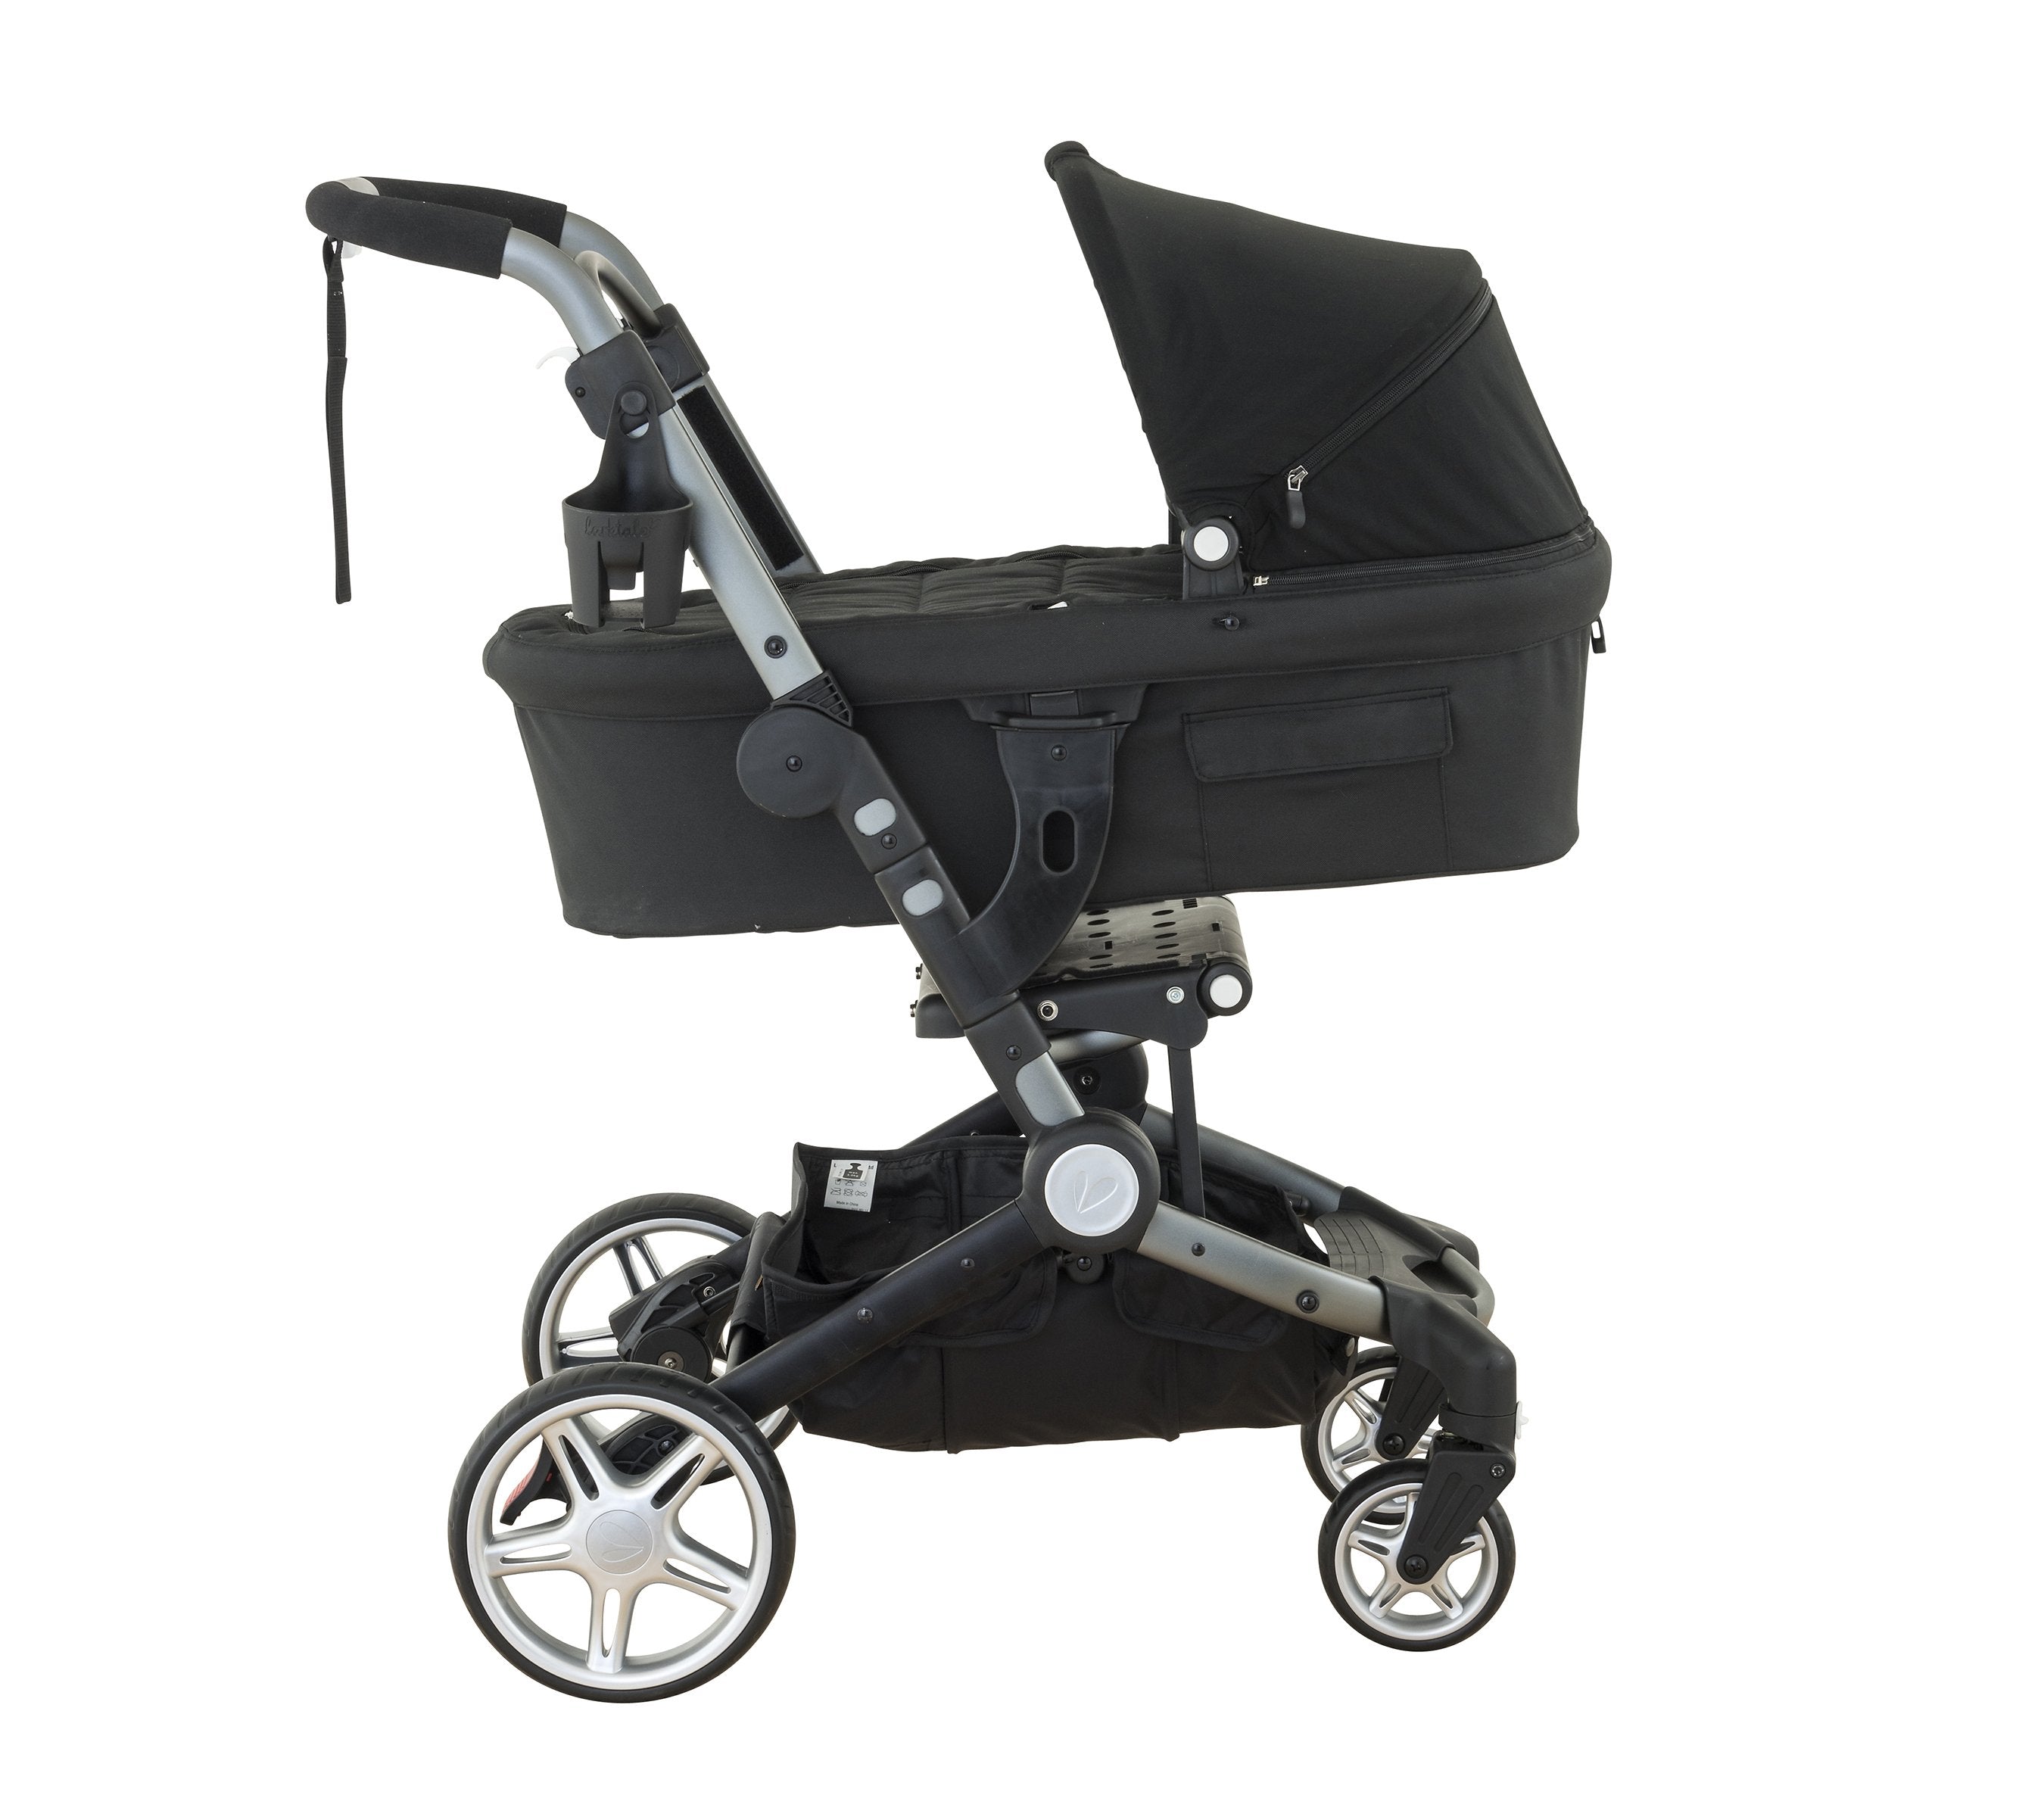 carry cot in black attached to stroller